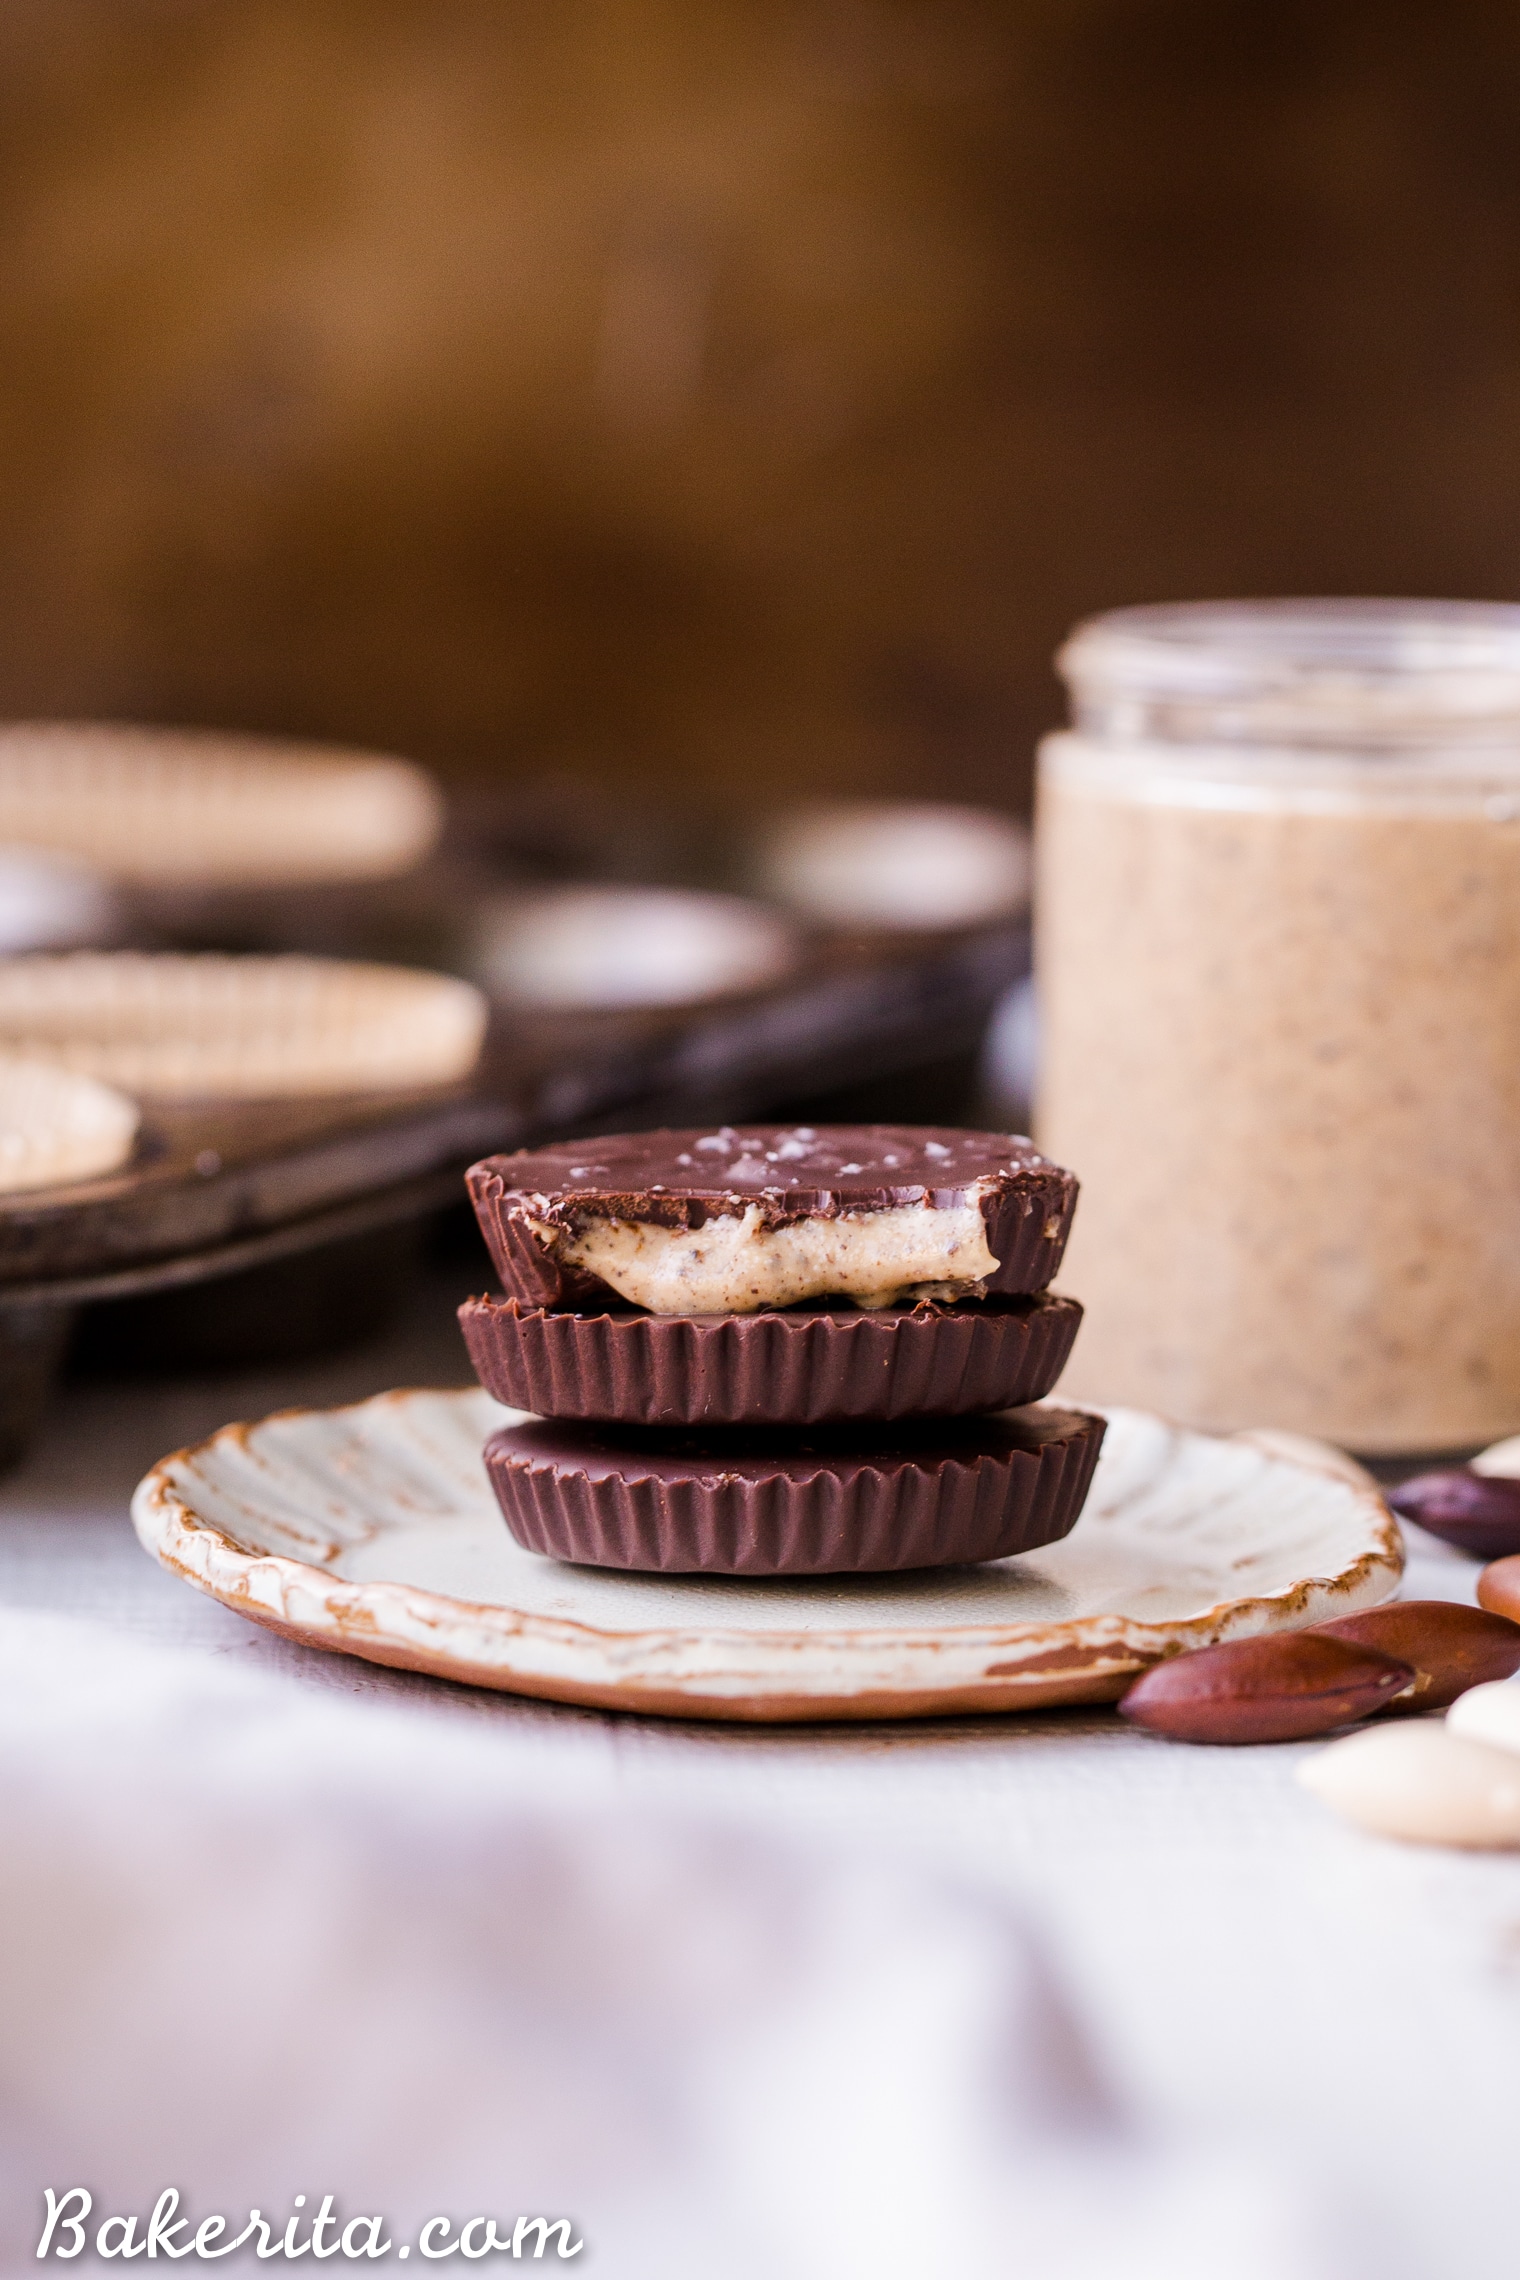 Have you ever heard of a Baru Nut? These superfood nuts are super high in protein and antioxidants, making them a great addition to your diet! This simple recipe shows you how to make a delicious Baru Nut Butter and Chocolate Baru Nut Butter Cups. They're gluten-free and vegan, with a paleo-option.